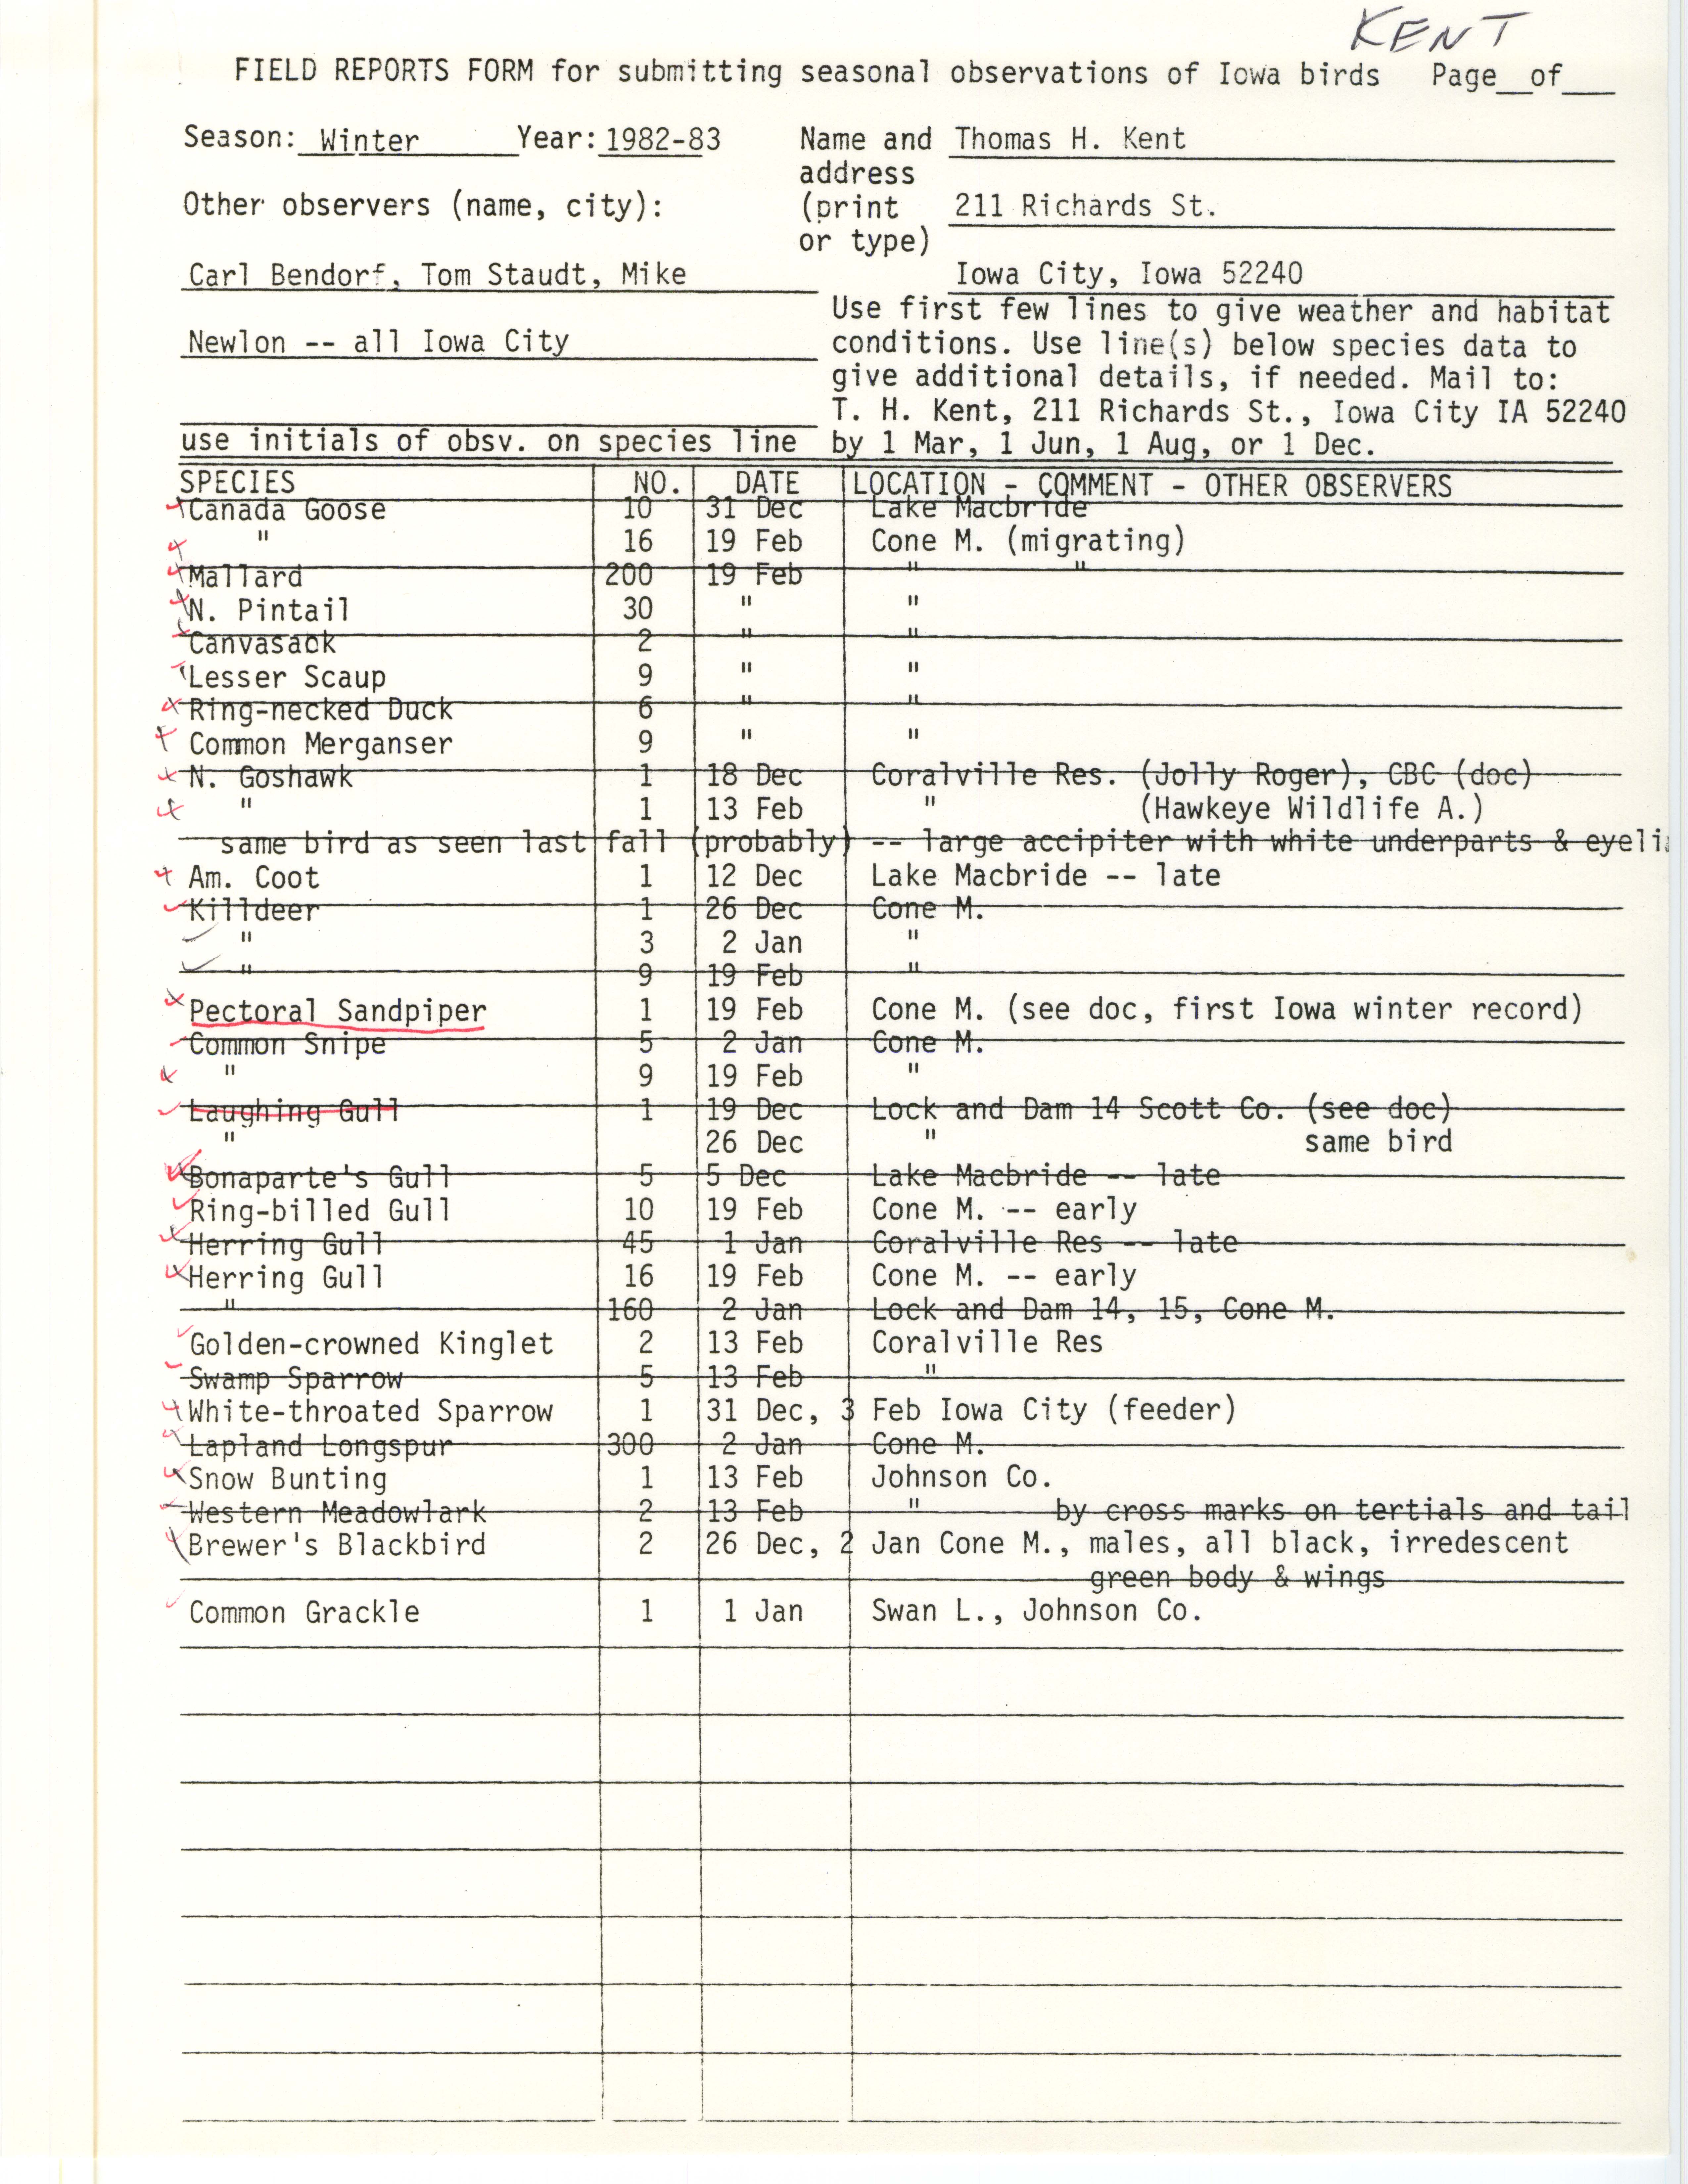 Field reports form for submitting seasonal observations of Iowa birds, Thomas H. Kent, winter 1982-1983